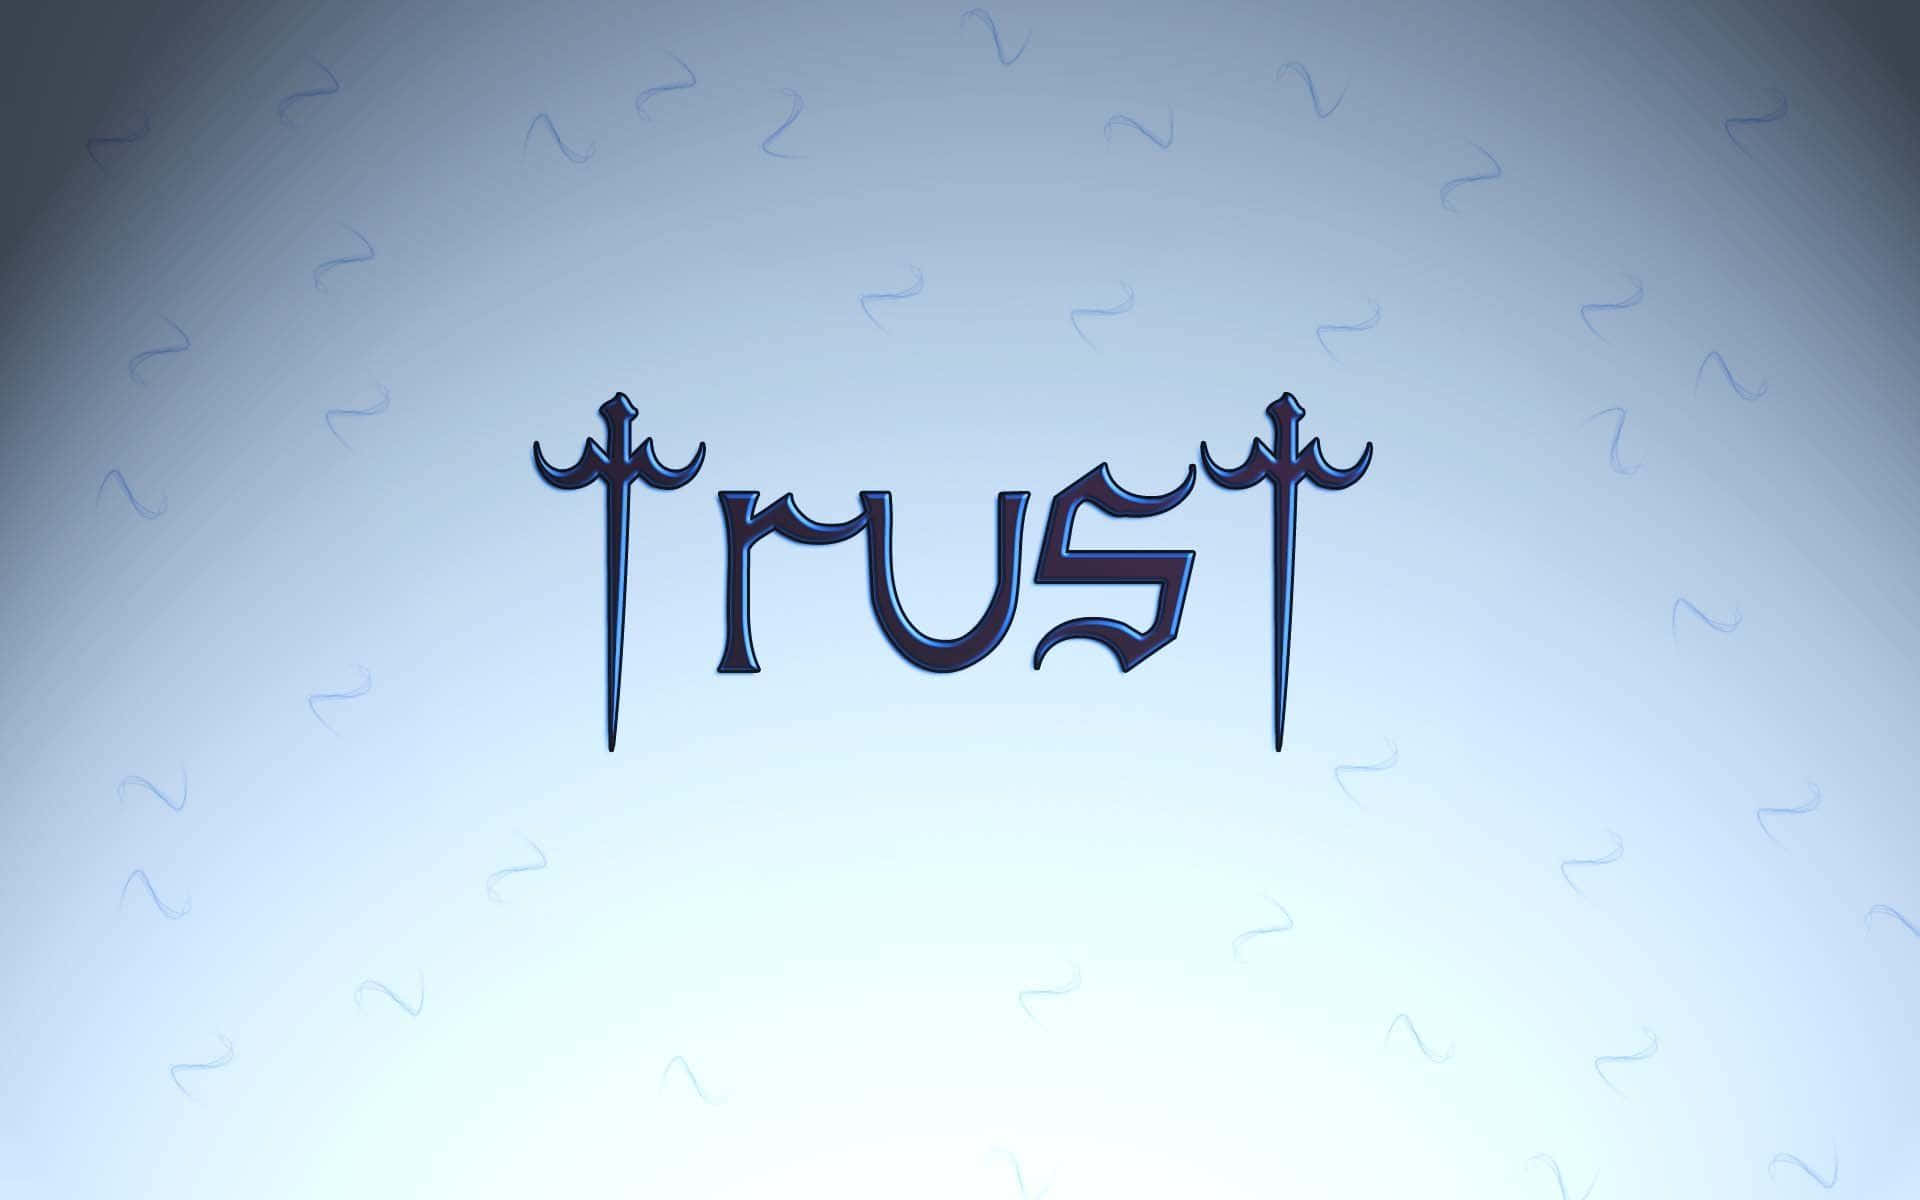 Trust is essential in any relationship